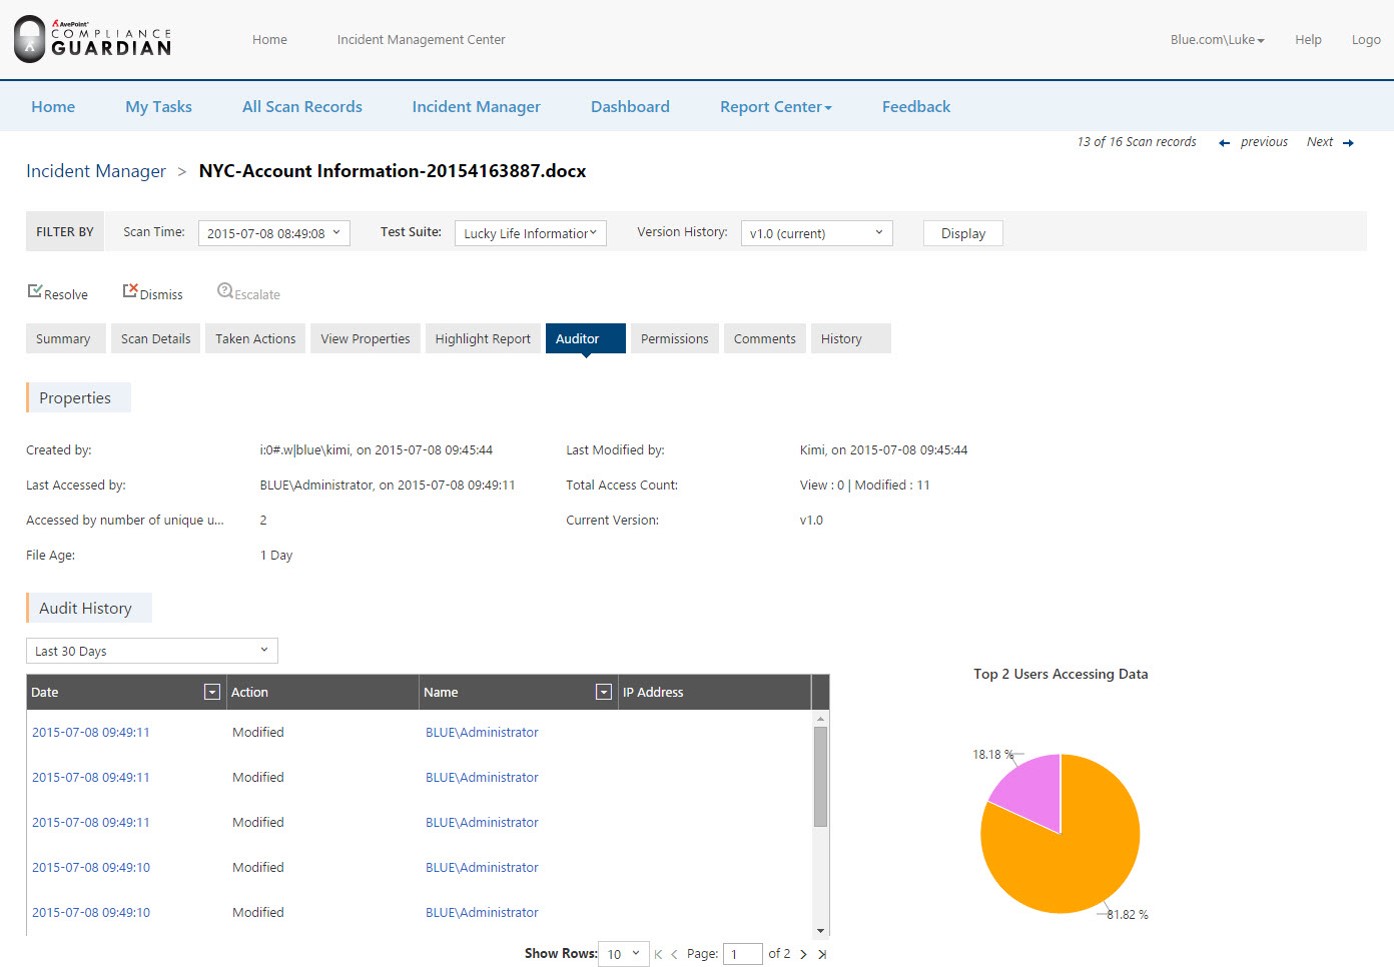 AvePoint Compliance Guardian provides a complete risk profile for content that includes permissions and audit history.